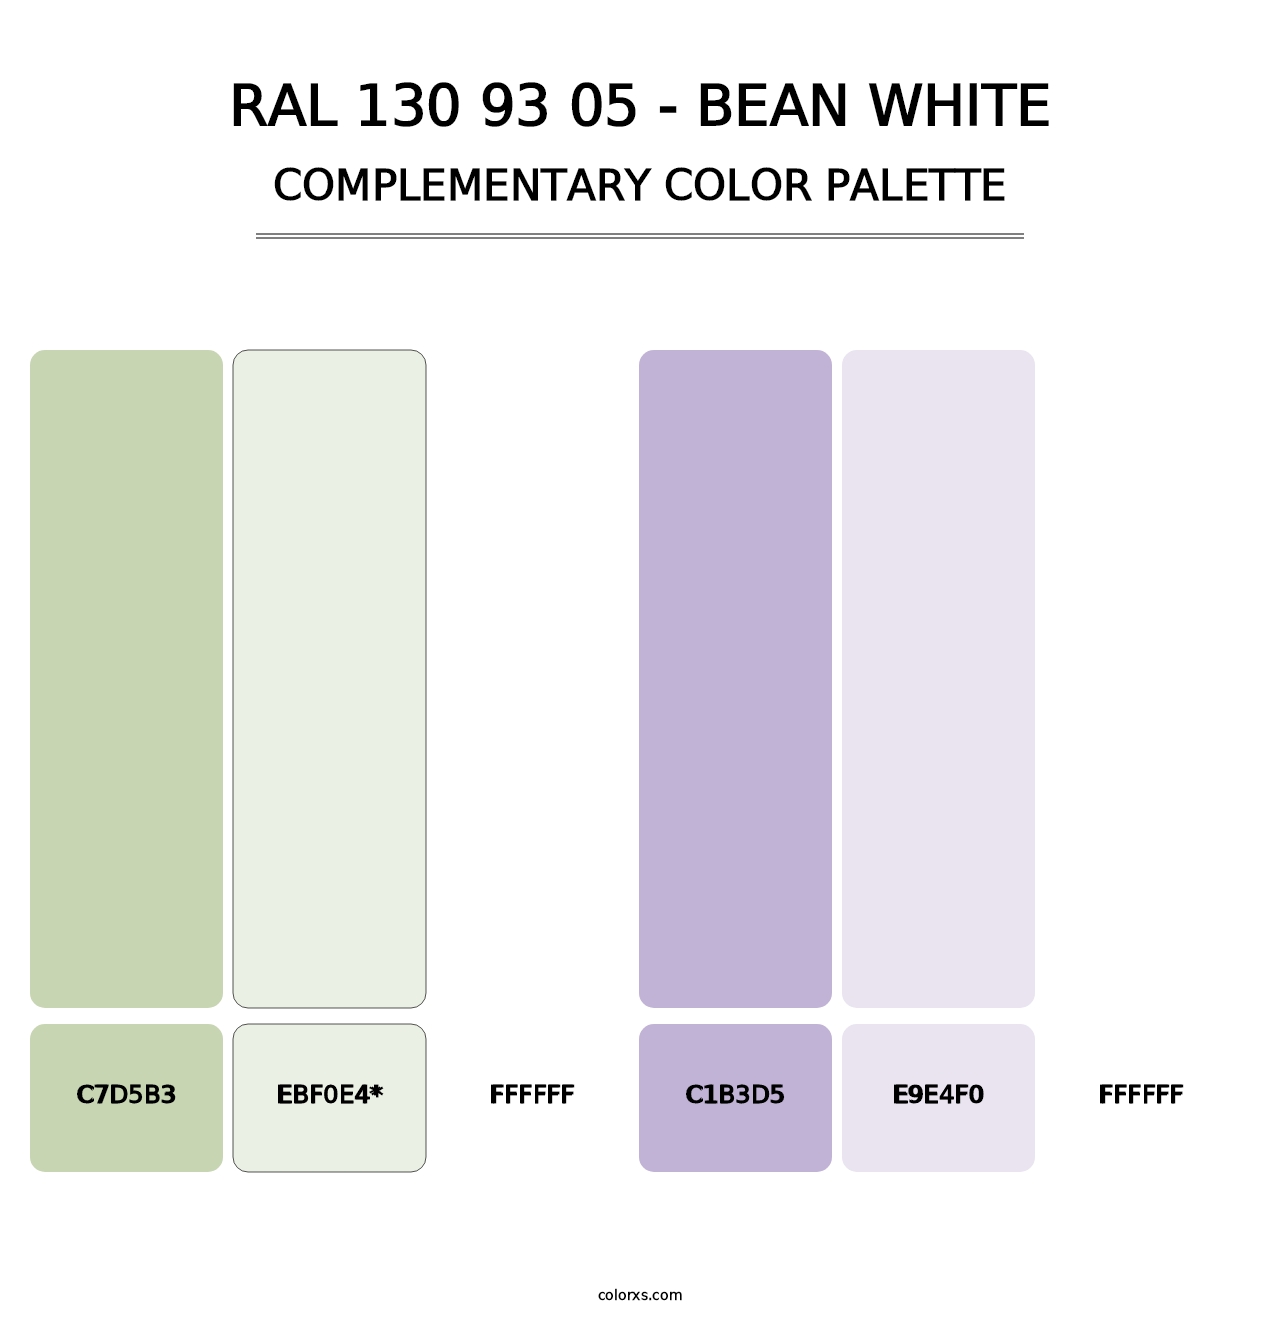 RAL 130 93 05 - Bean White - Complementary Color Palette